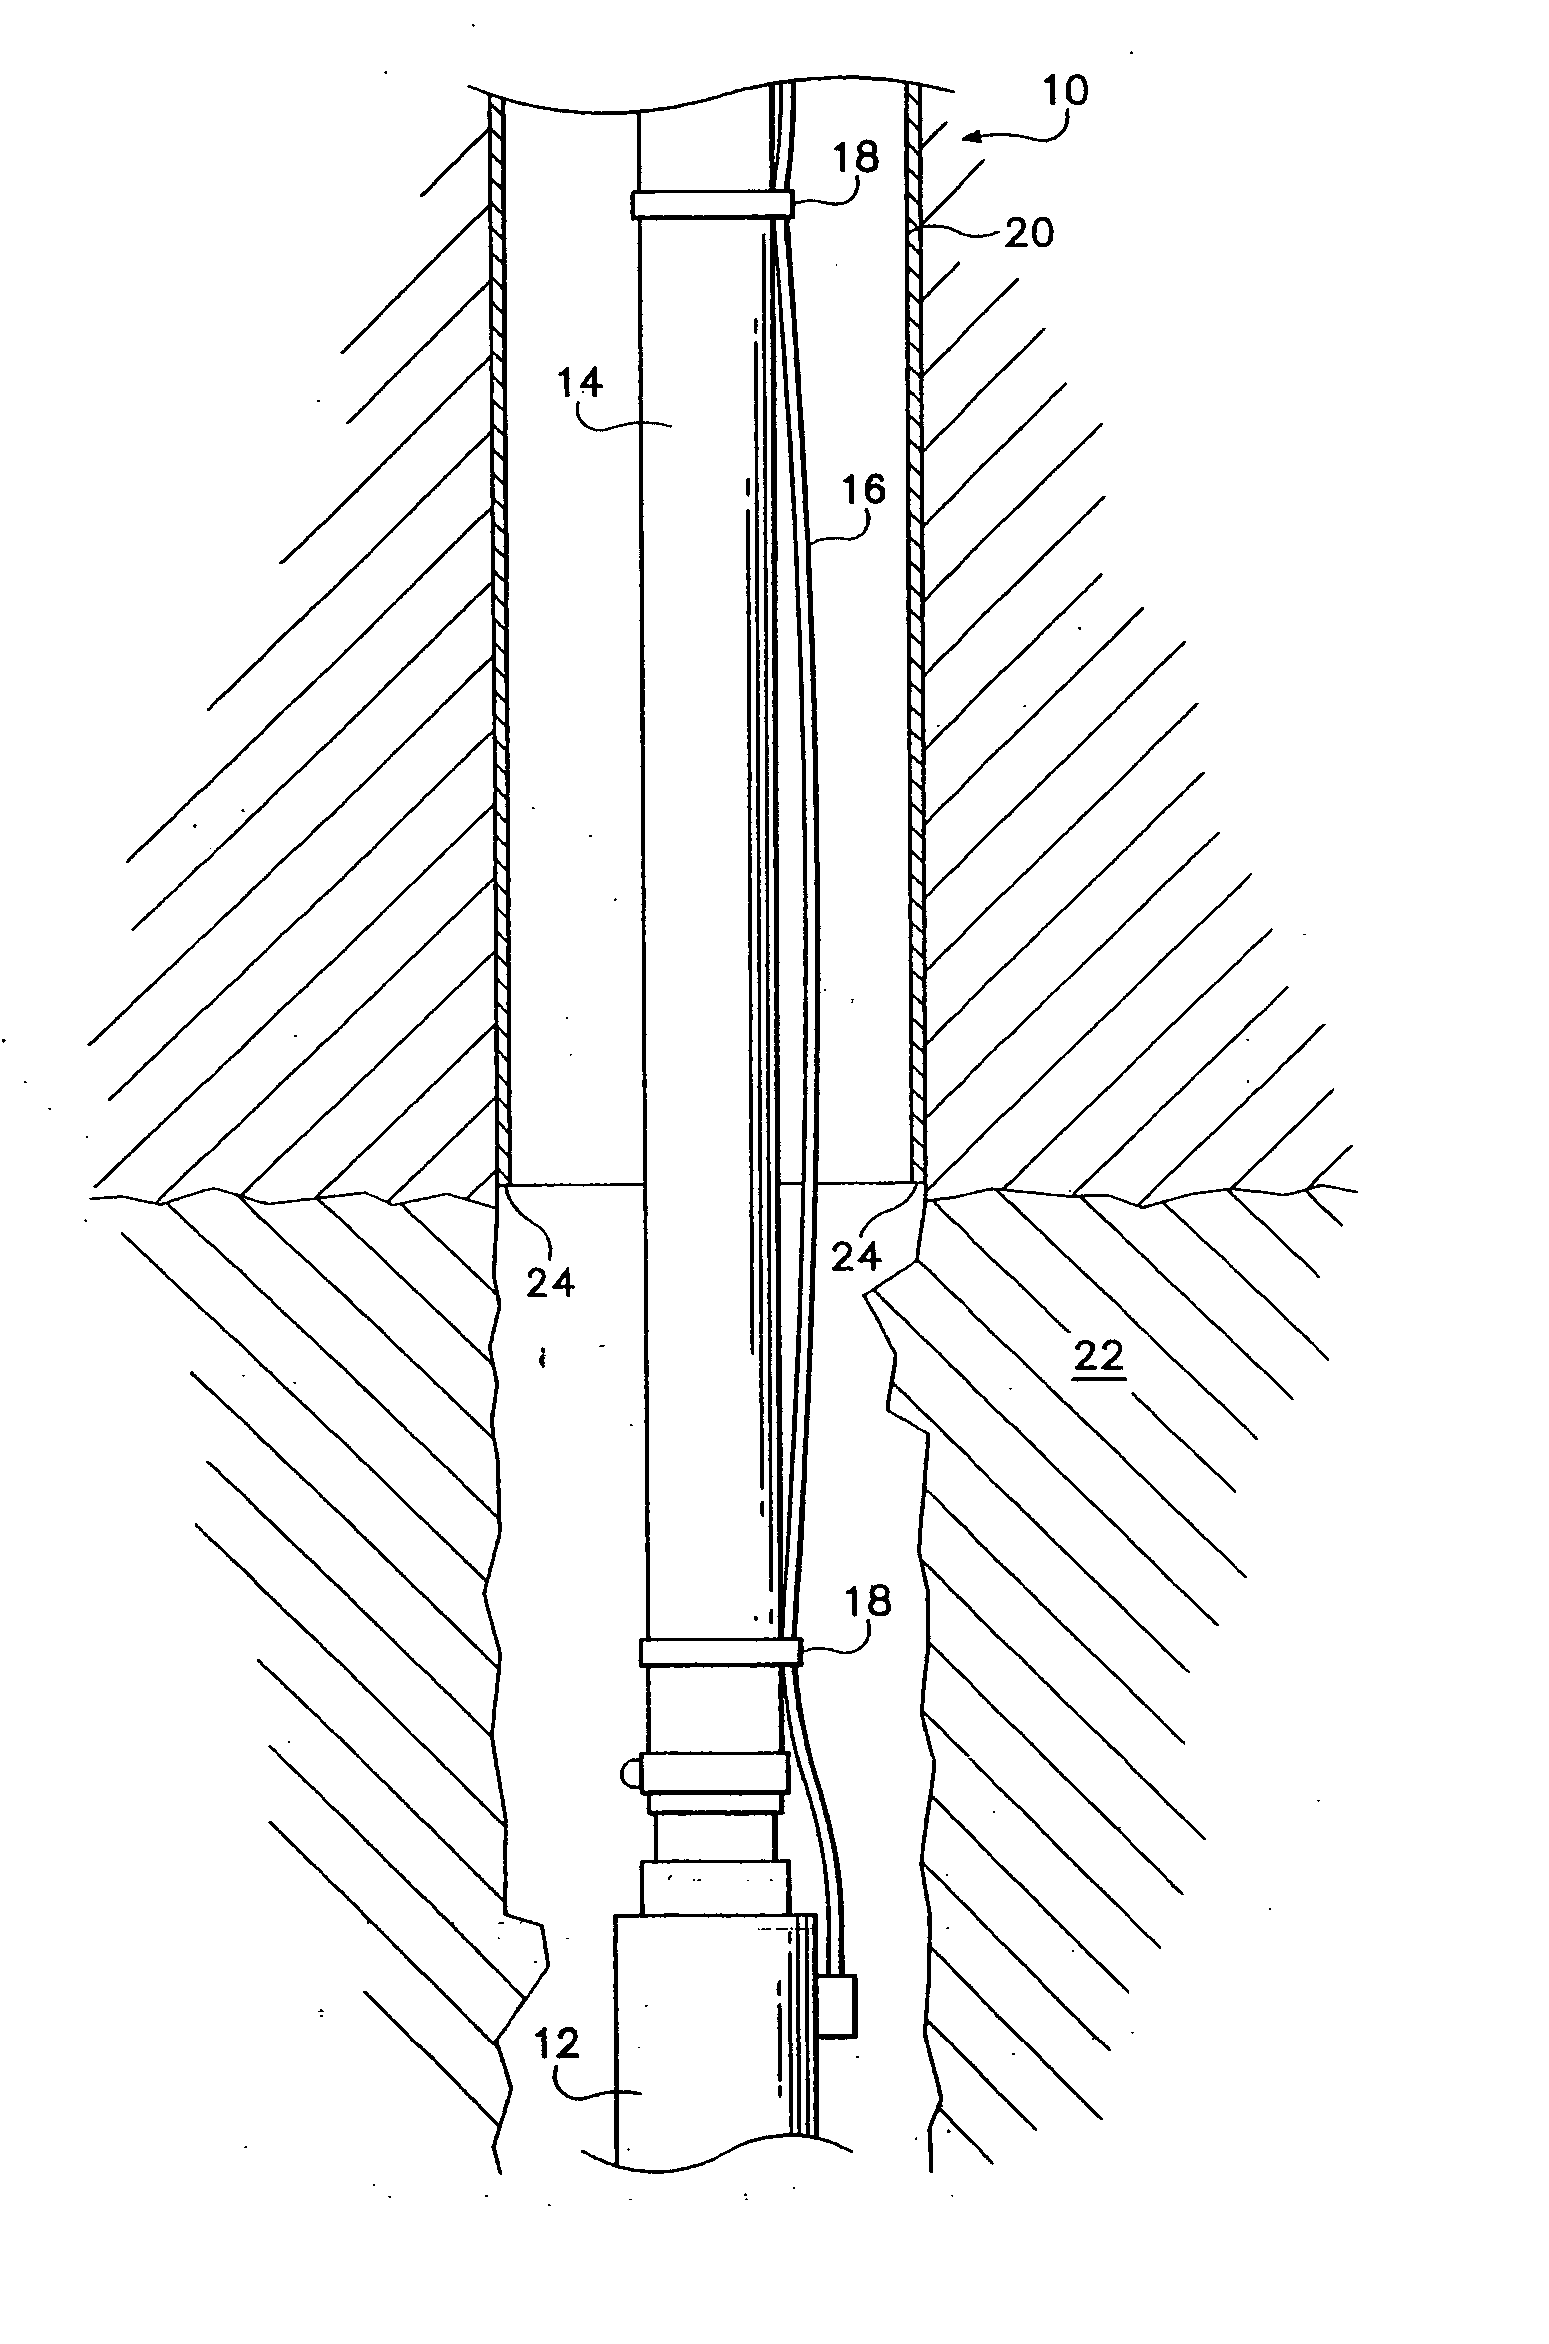 Method for installing a water well pump